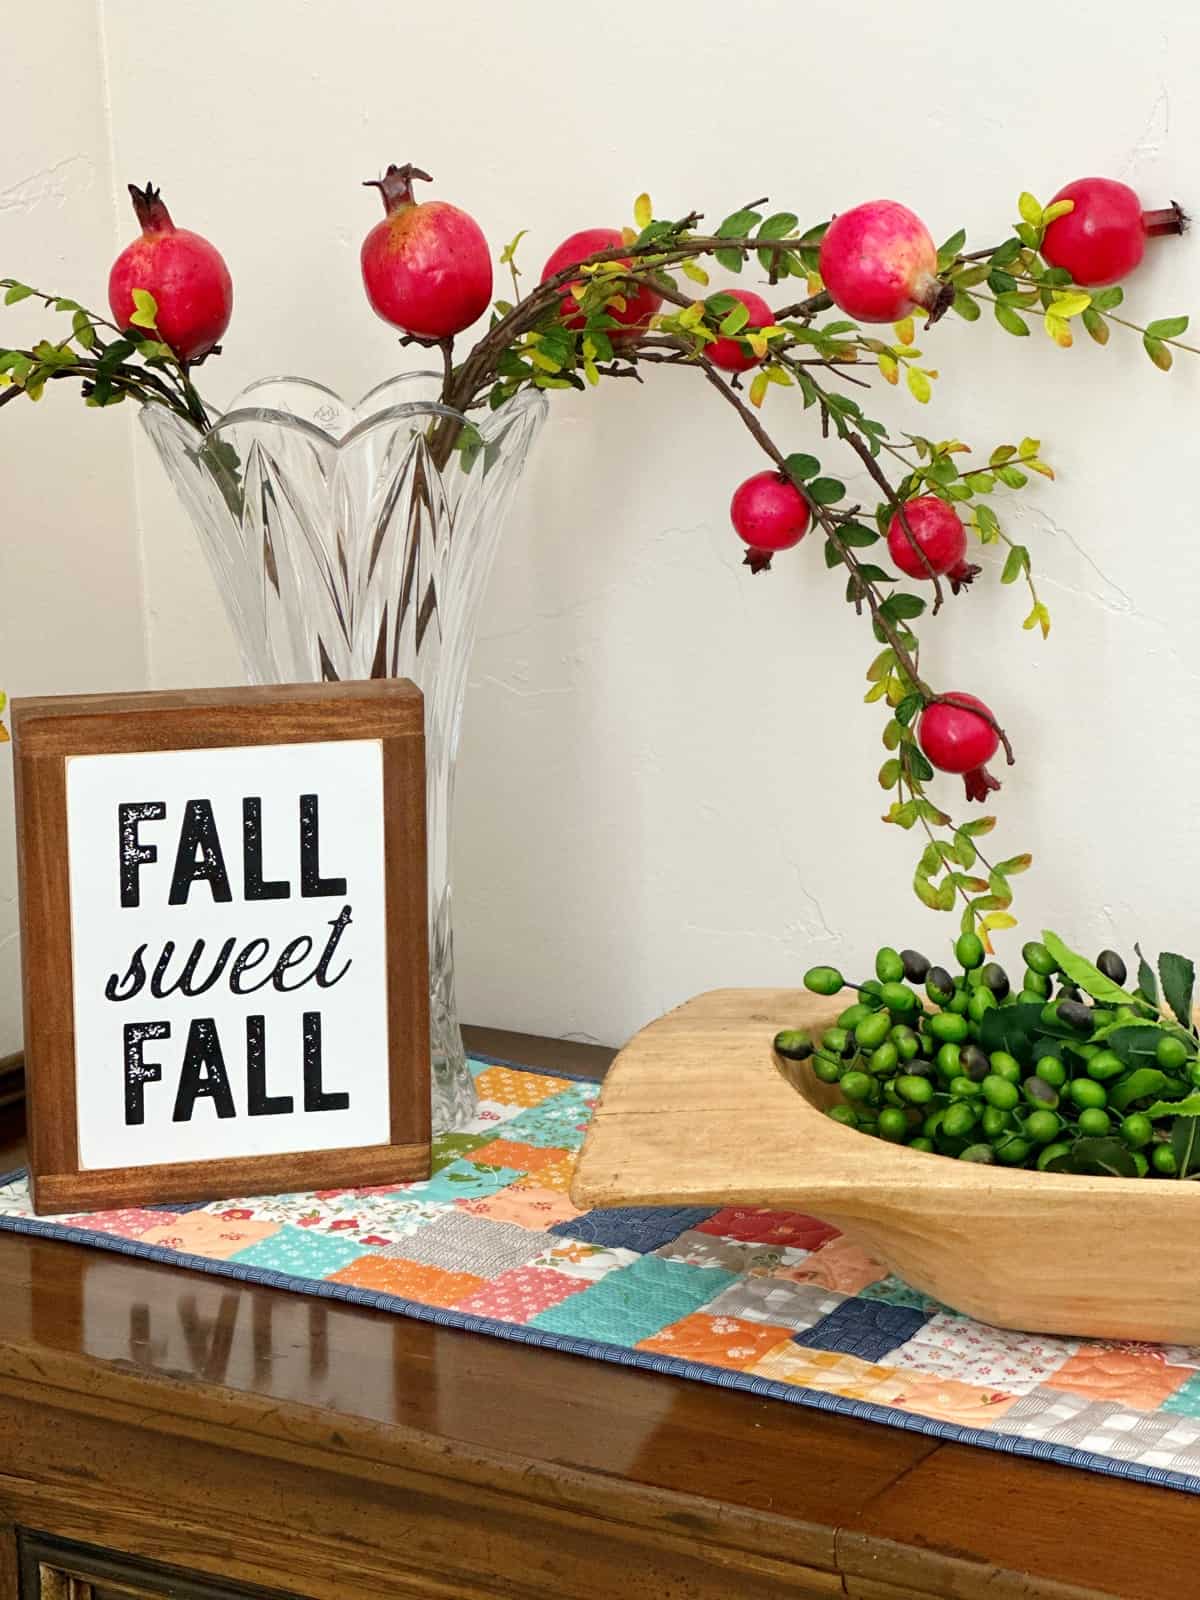 Quilted patchwork table topper with wooden bowl, fall sweet fall sign, pomegranate leaves in vase on side table.